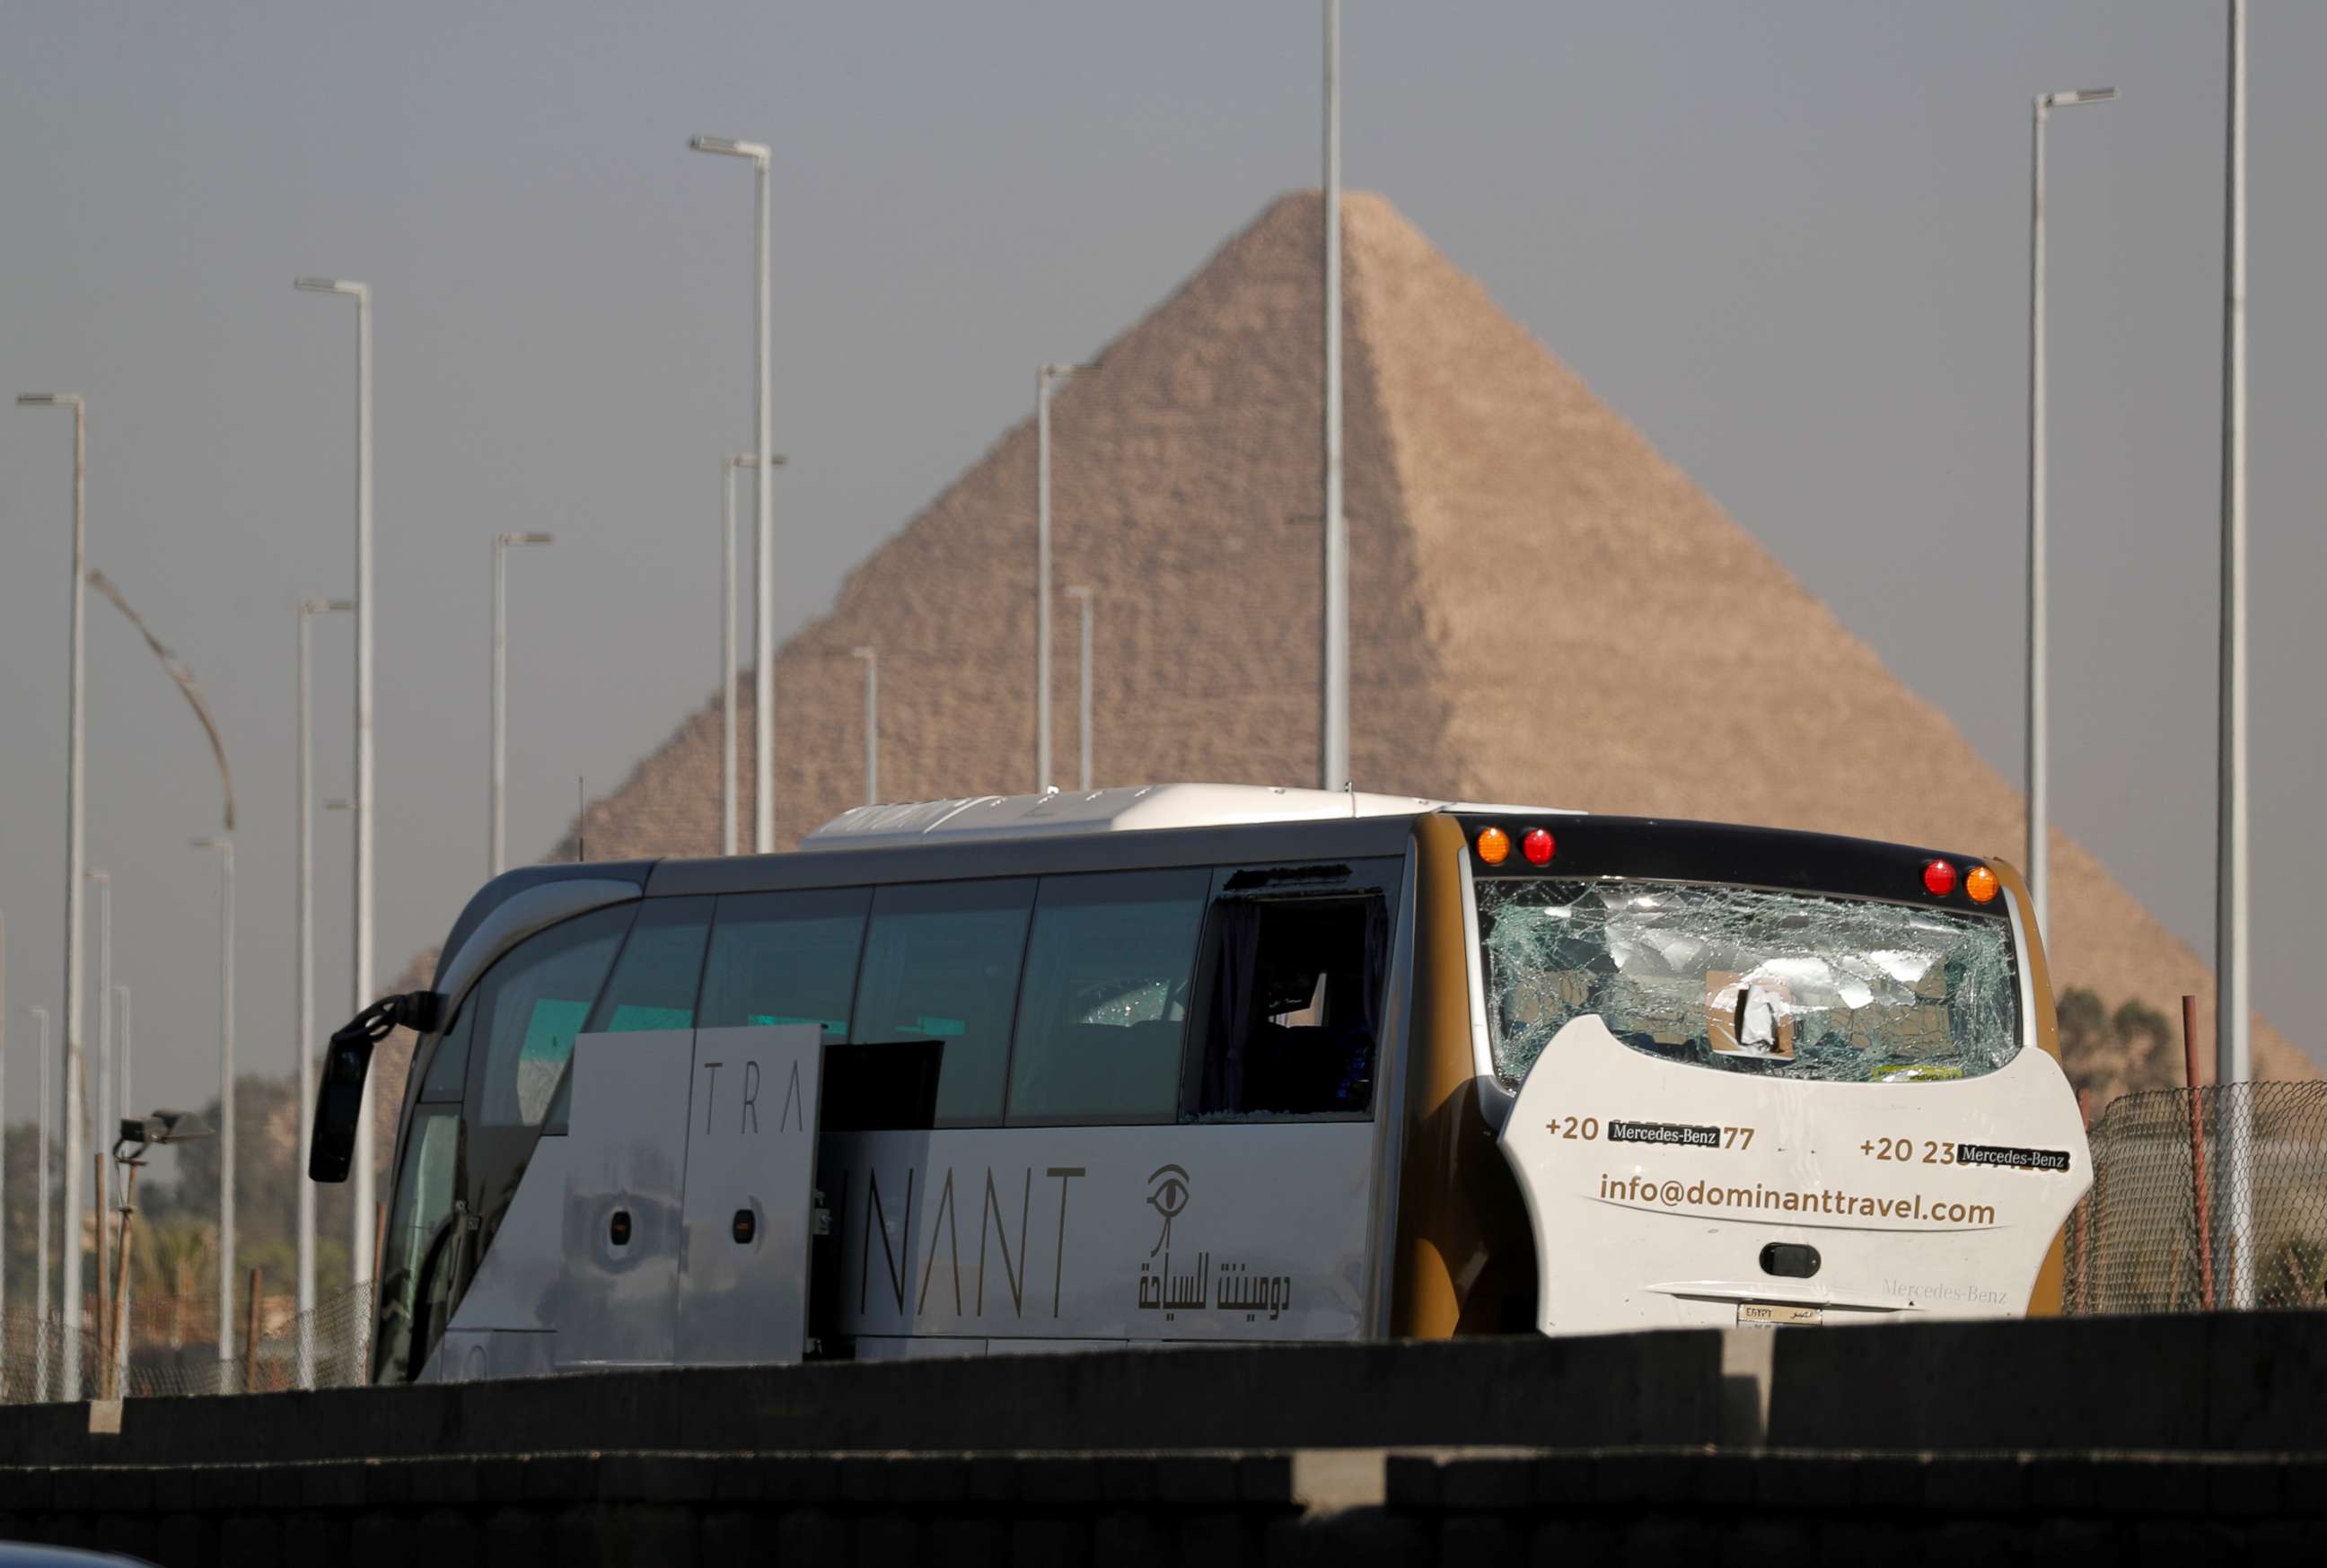 PHOTO:A damaged bus is seen at the site of a blast near a new museum being built close to the Giza pyramids in Cairo, May 19, 2019.